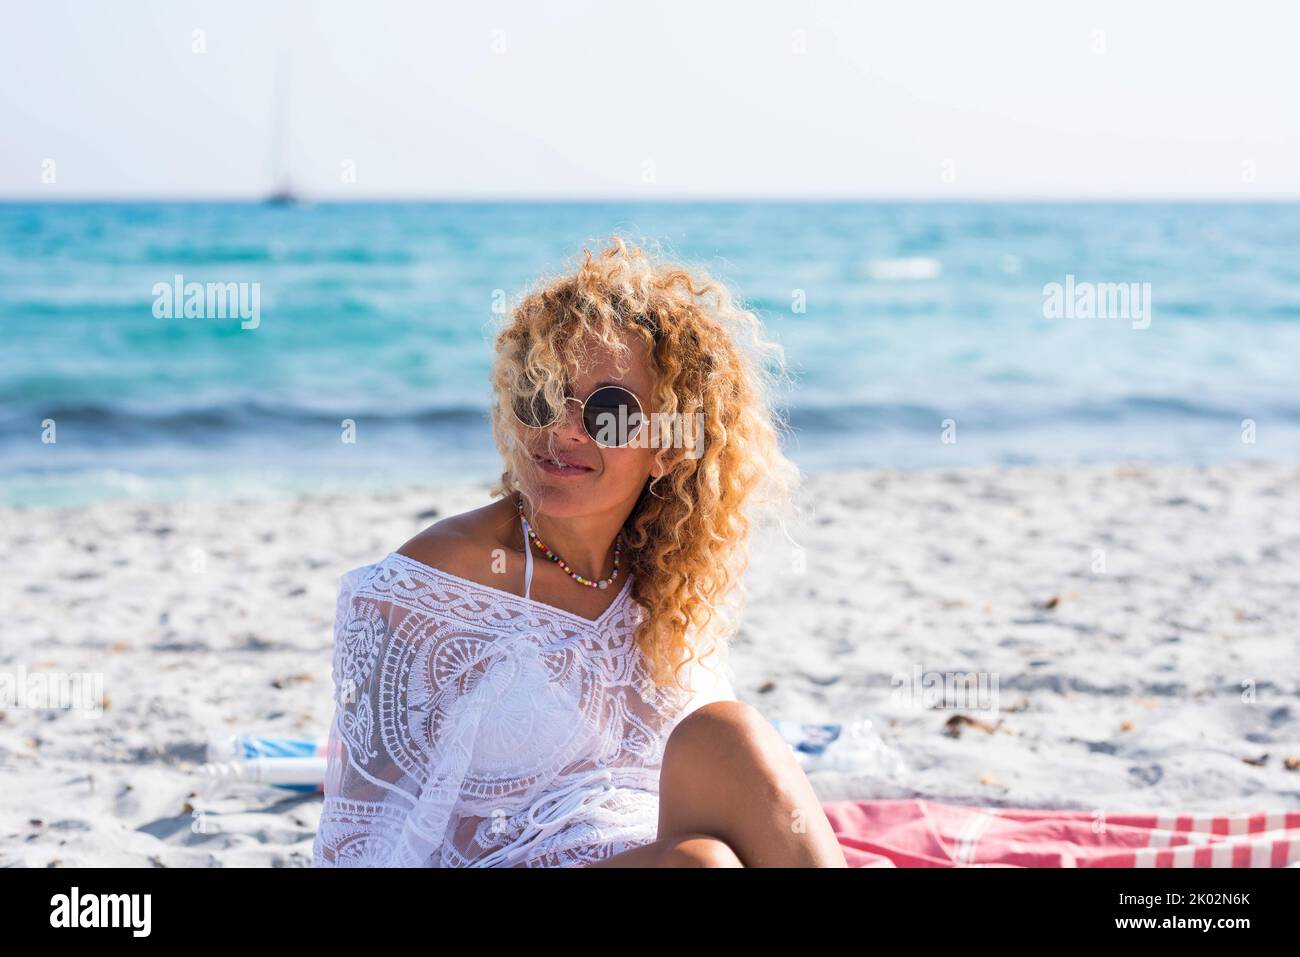 Cheerful female tourist smile and enjoy summer holiday vacation sitting and relaxing at the beach with blue sea water in background. Tropical sand and woman happy lifestyle. Portrait of pady Stock Photo